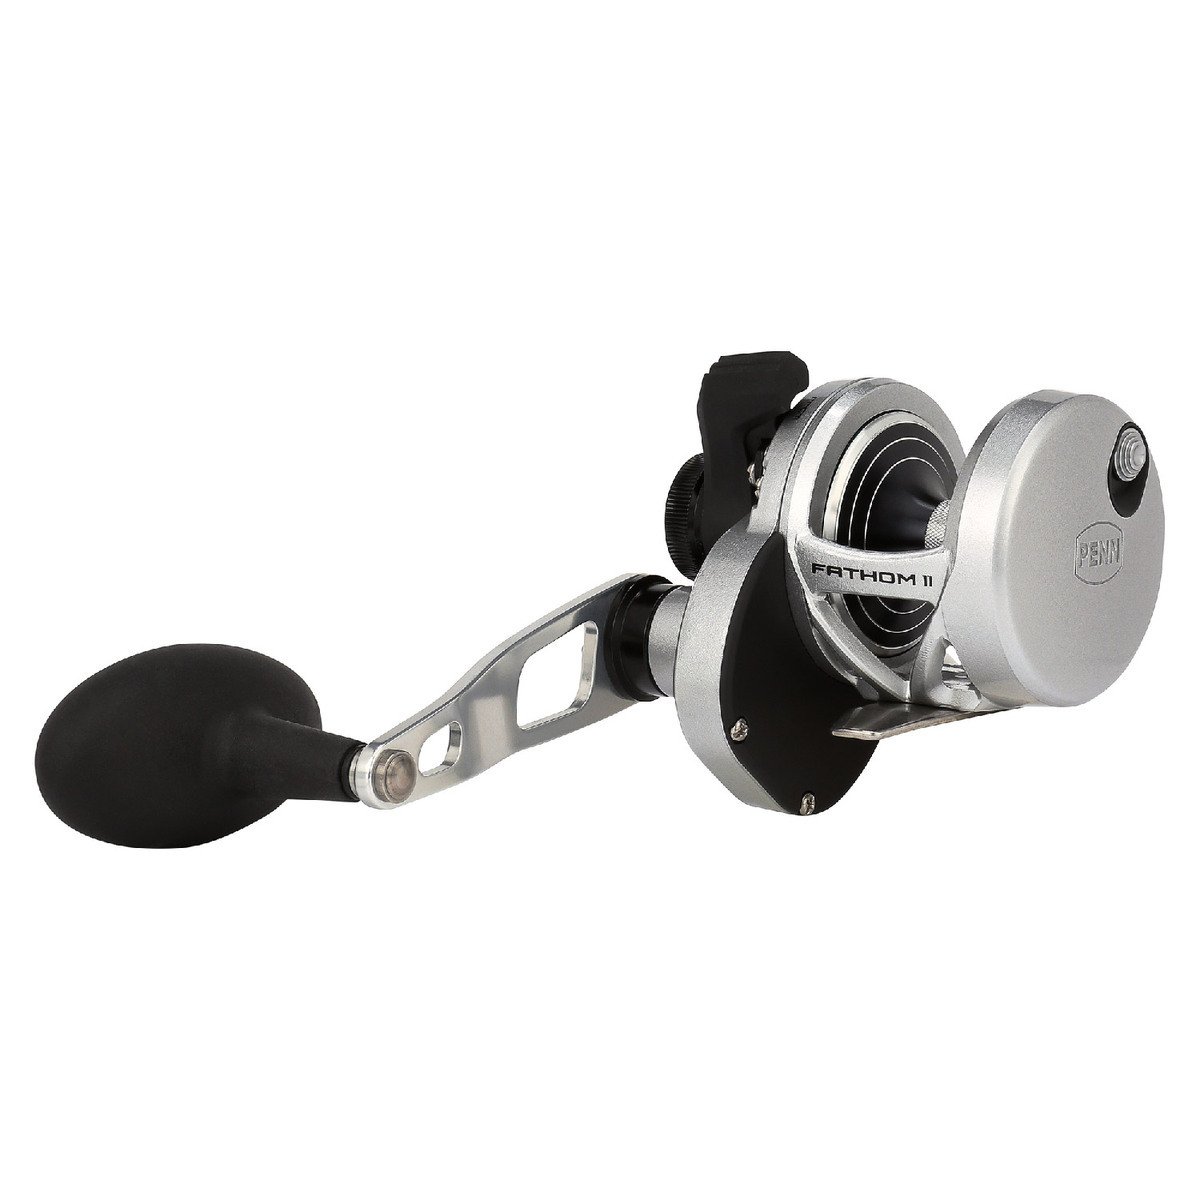 Penn 209M Level Wind Conventional Fishing Reel - Right Hand